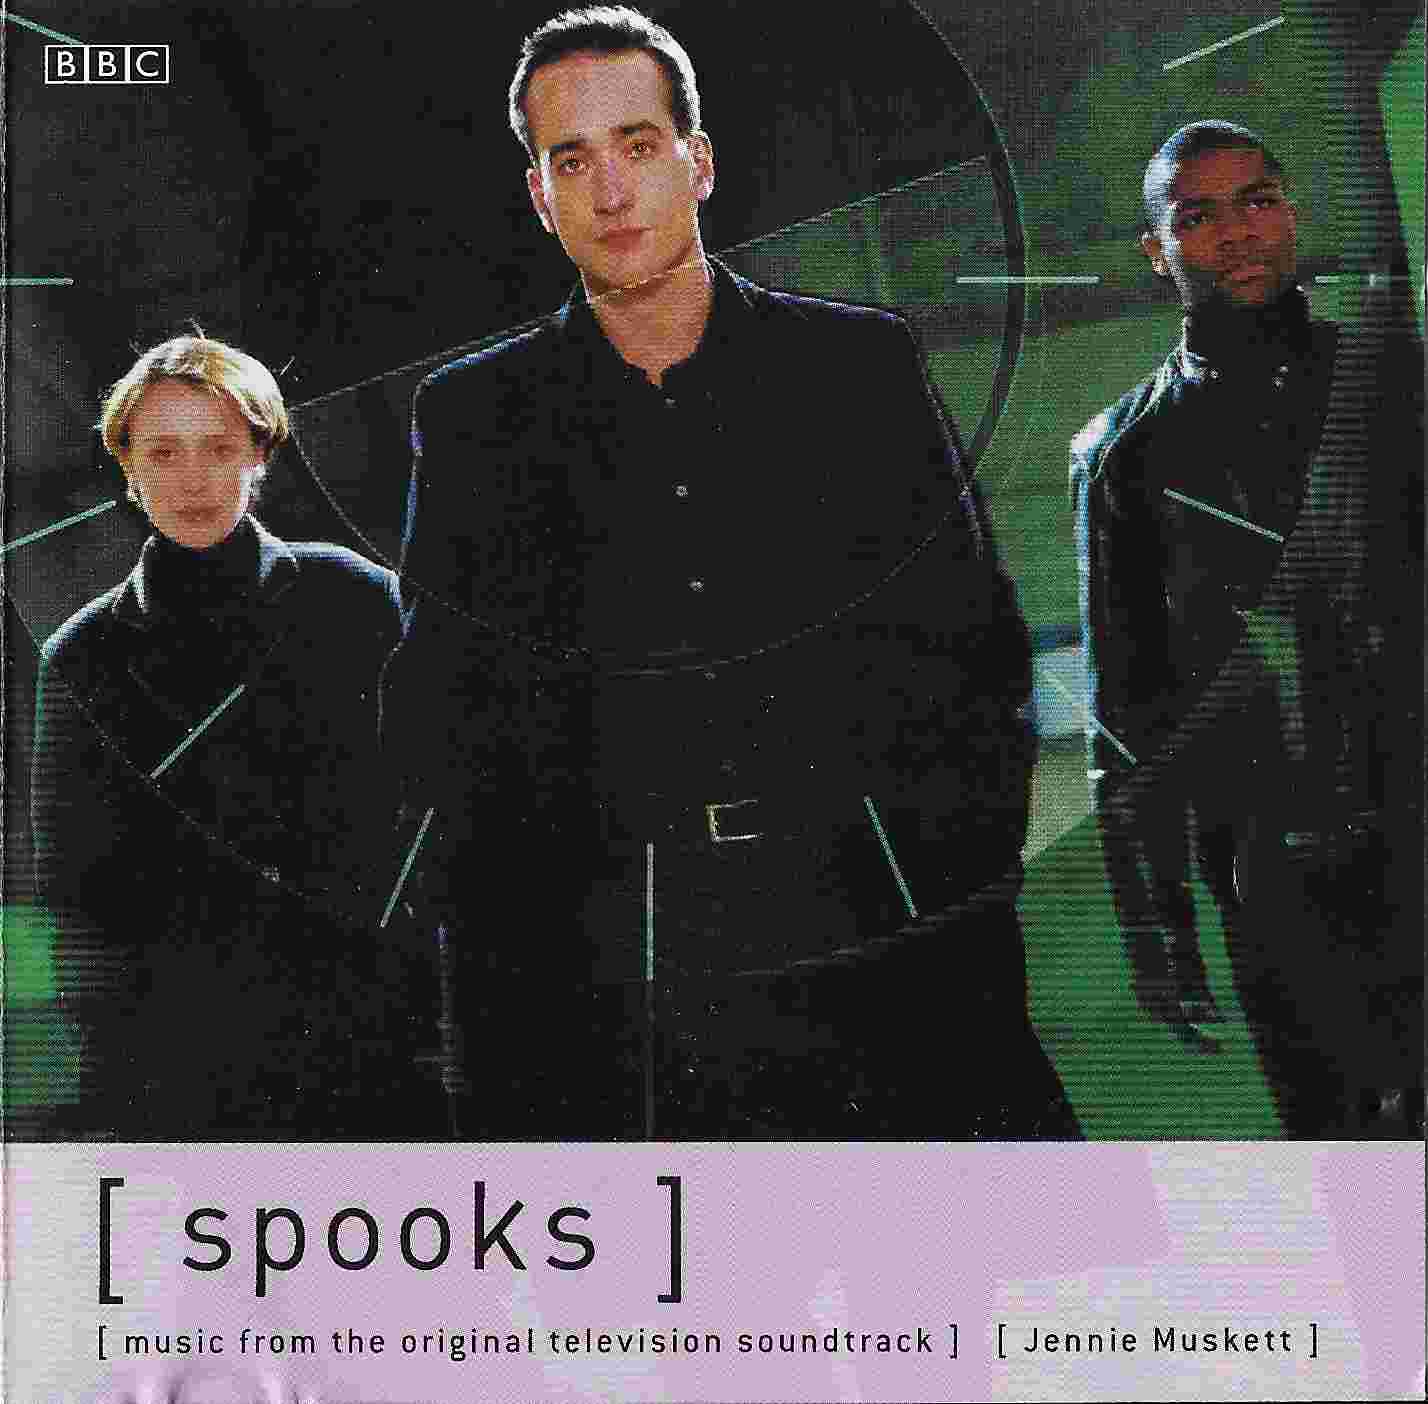 Picture of [ spooks ] Music from the original television soundtrack by artist Jennie Muskett from the BBC cds - Records and Tapes library